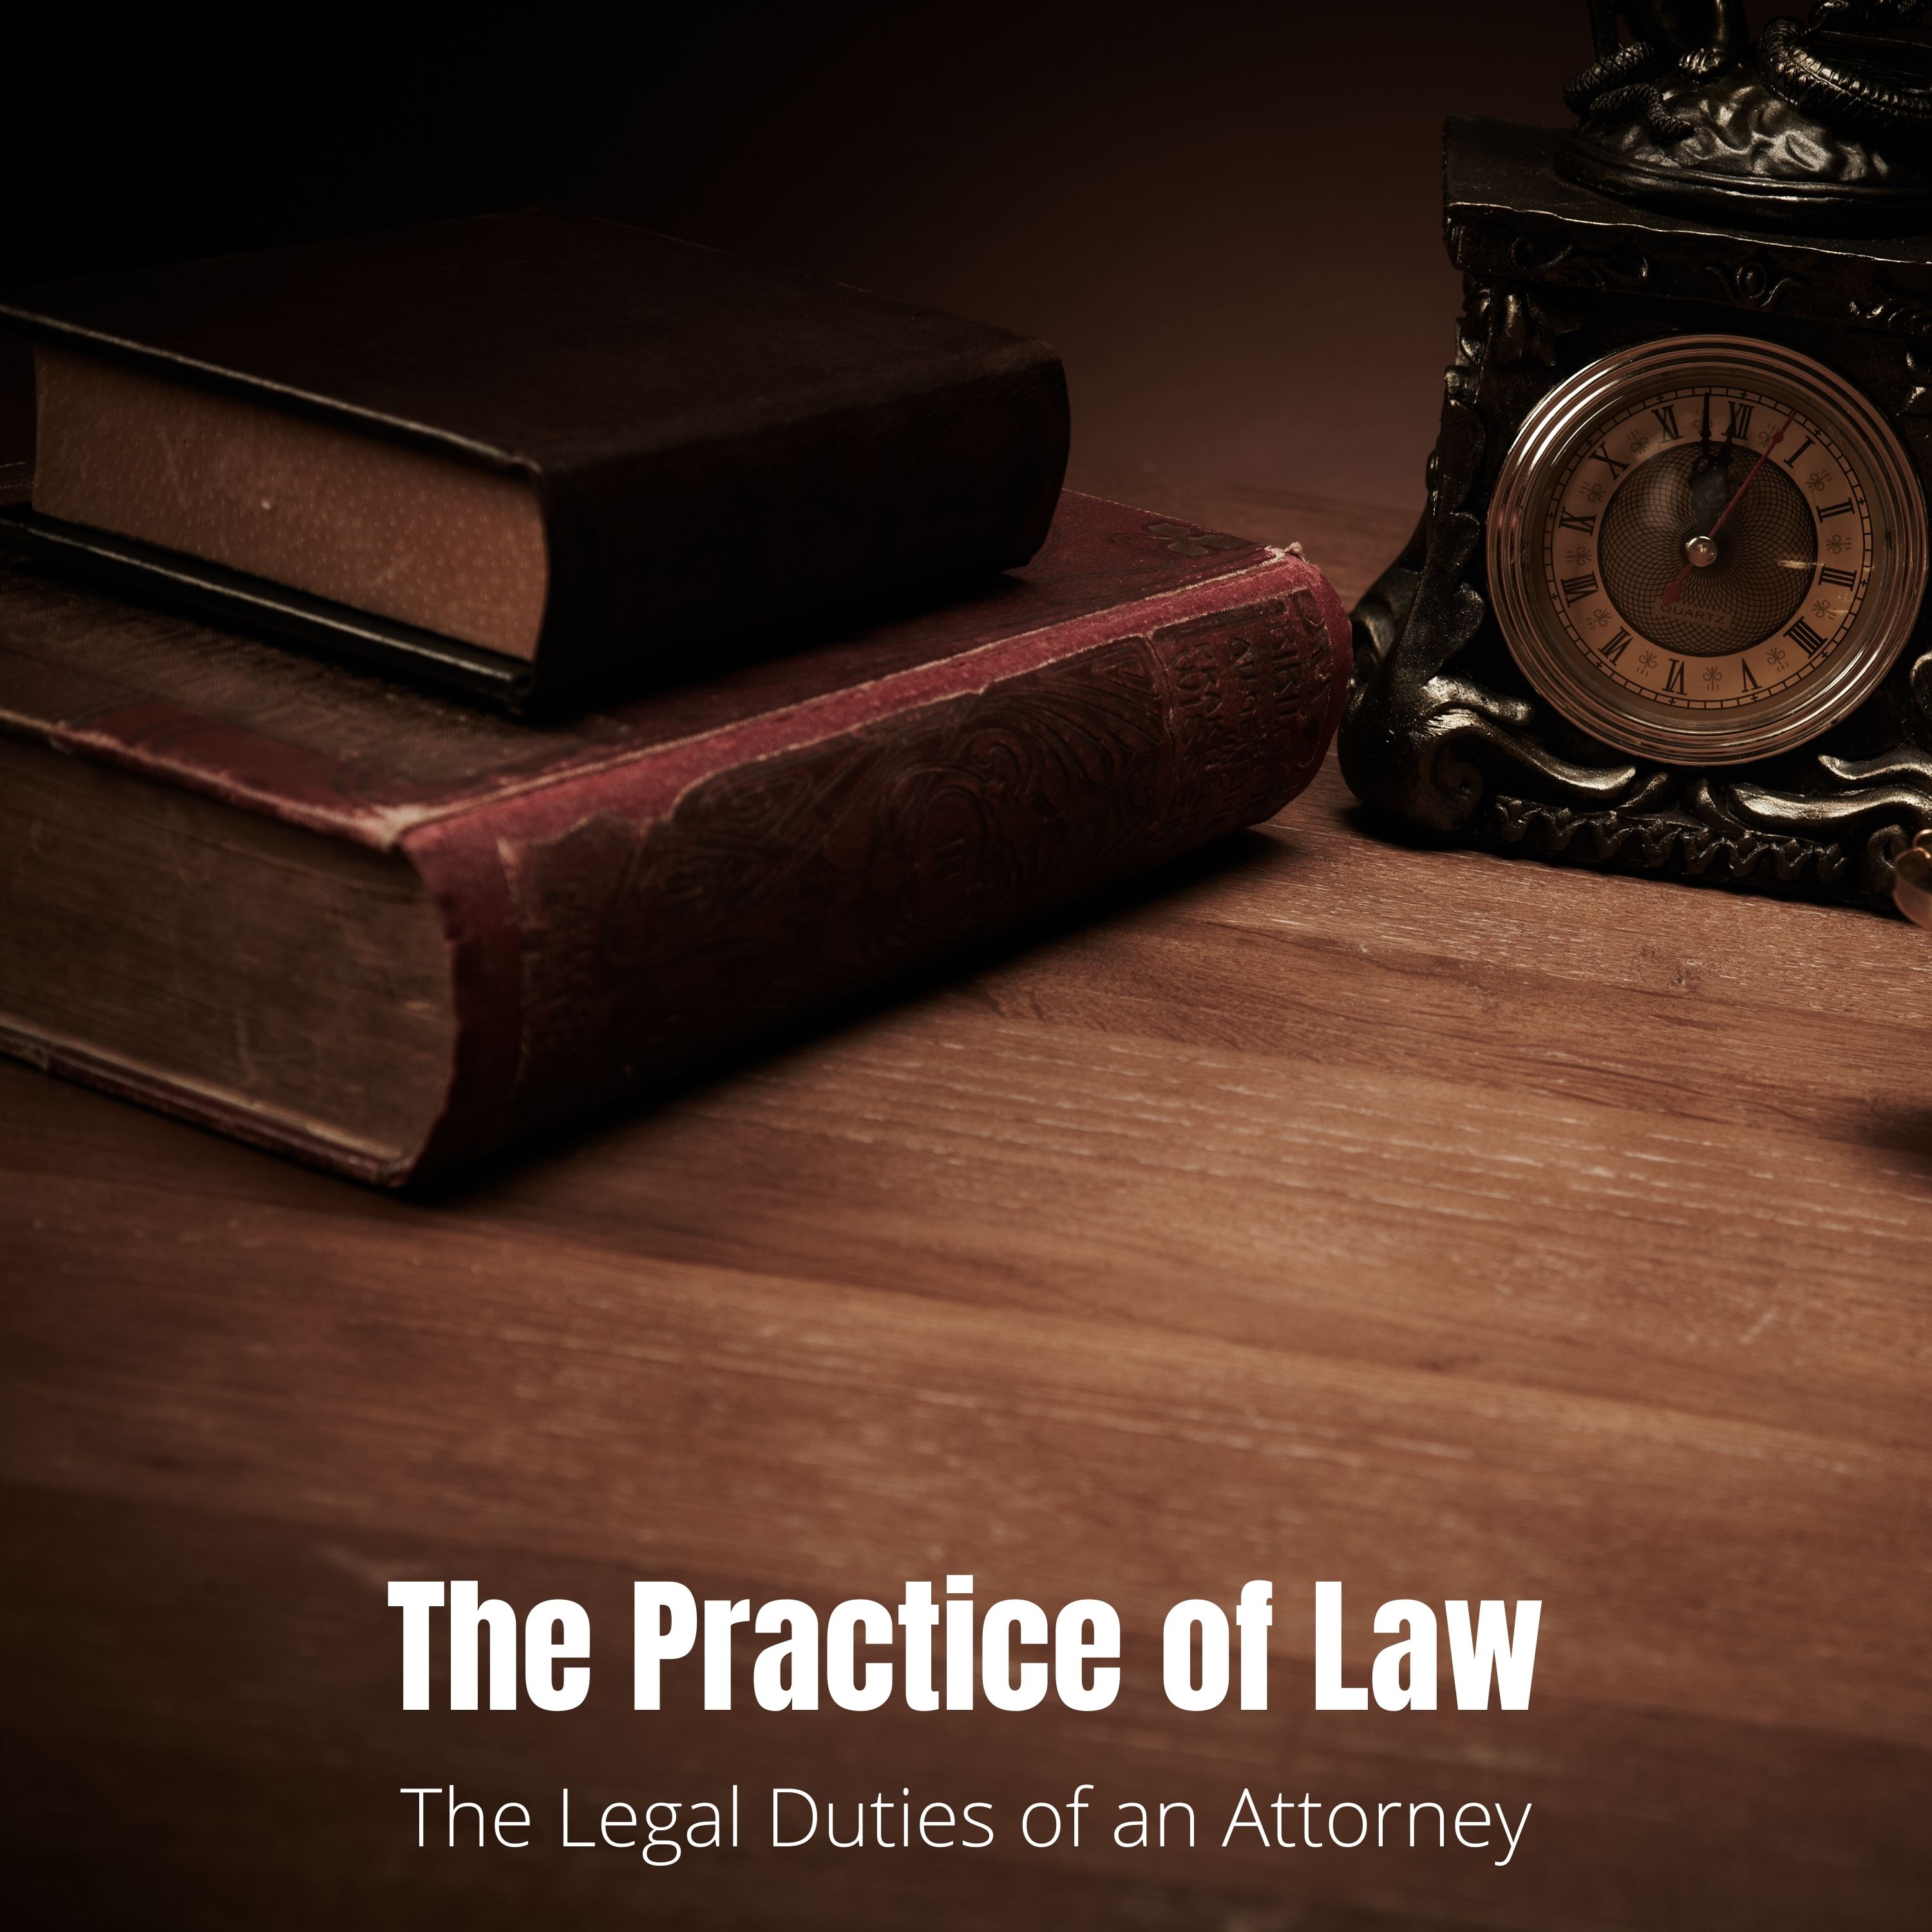 The Practice of Law - Lecture 3: The Legal Duties of an Attorney